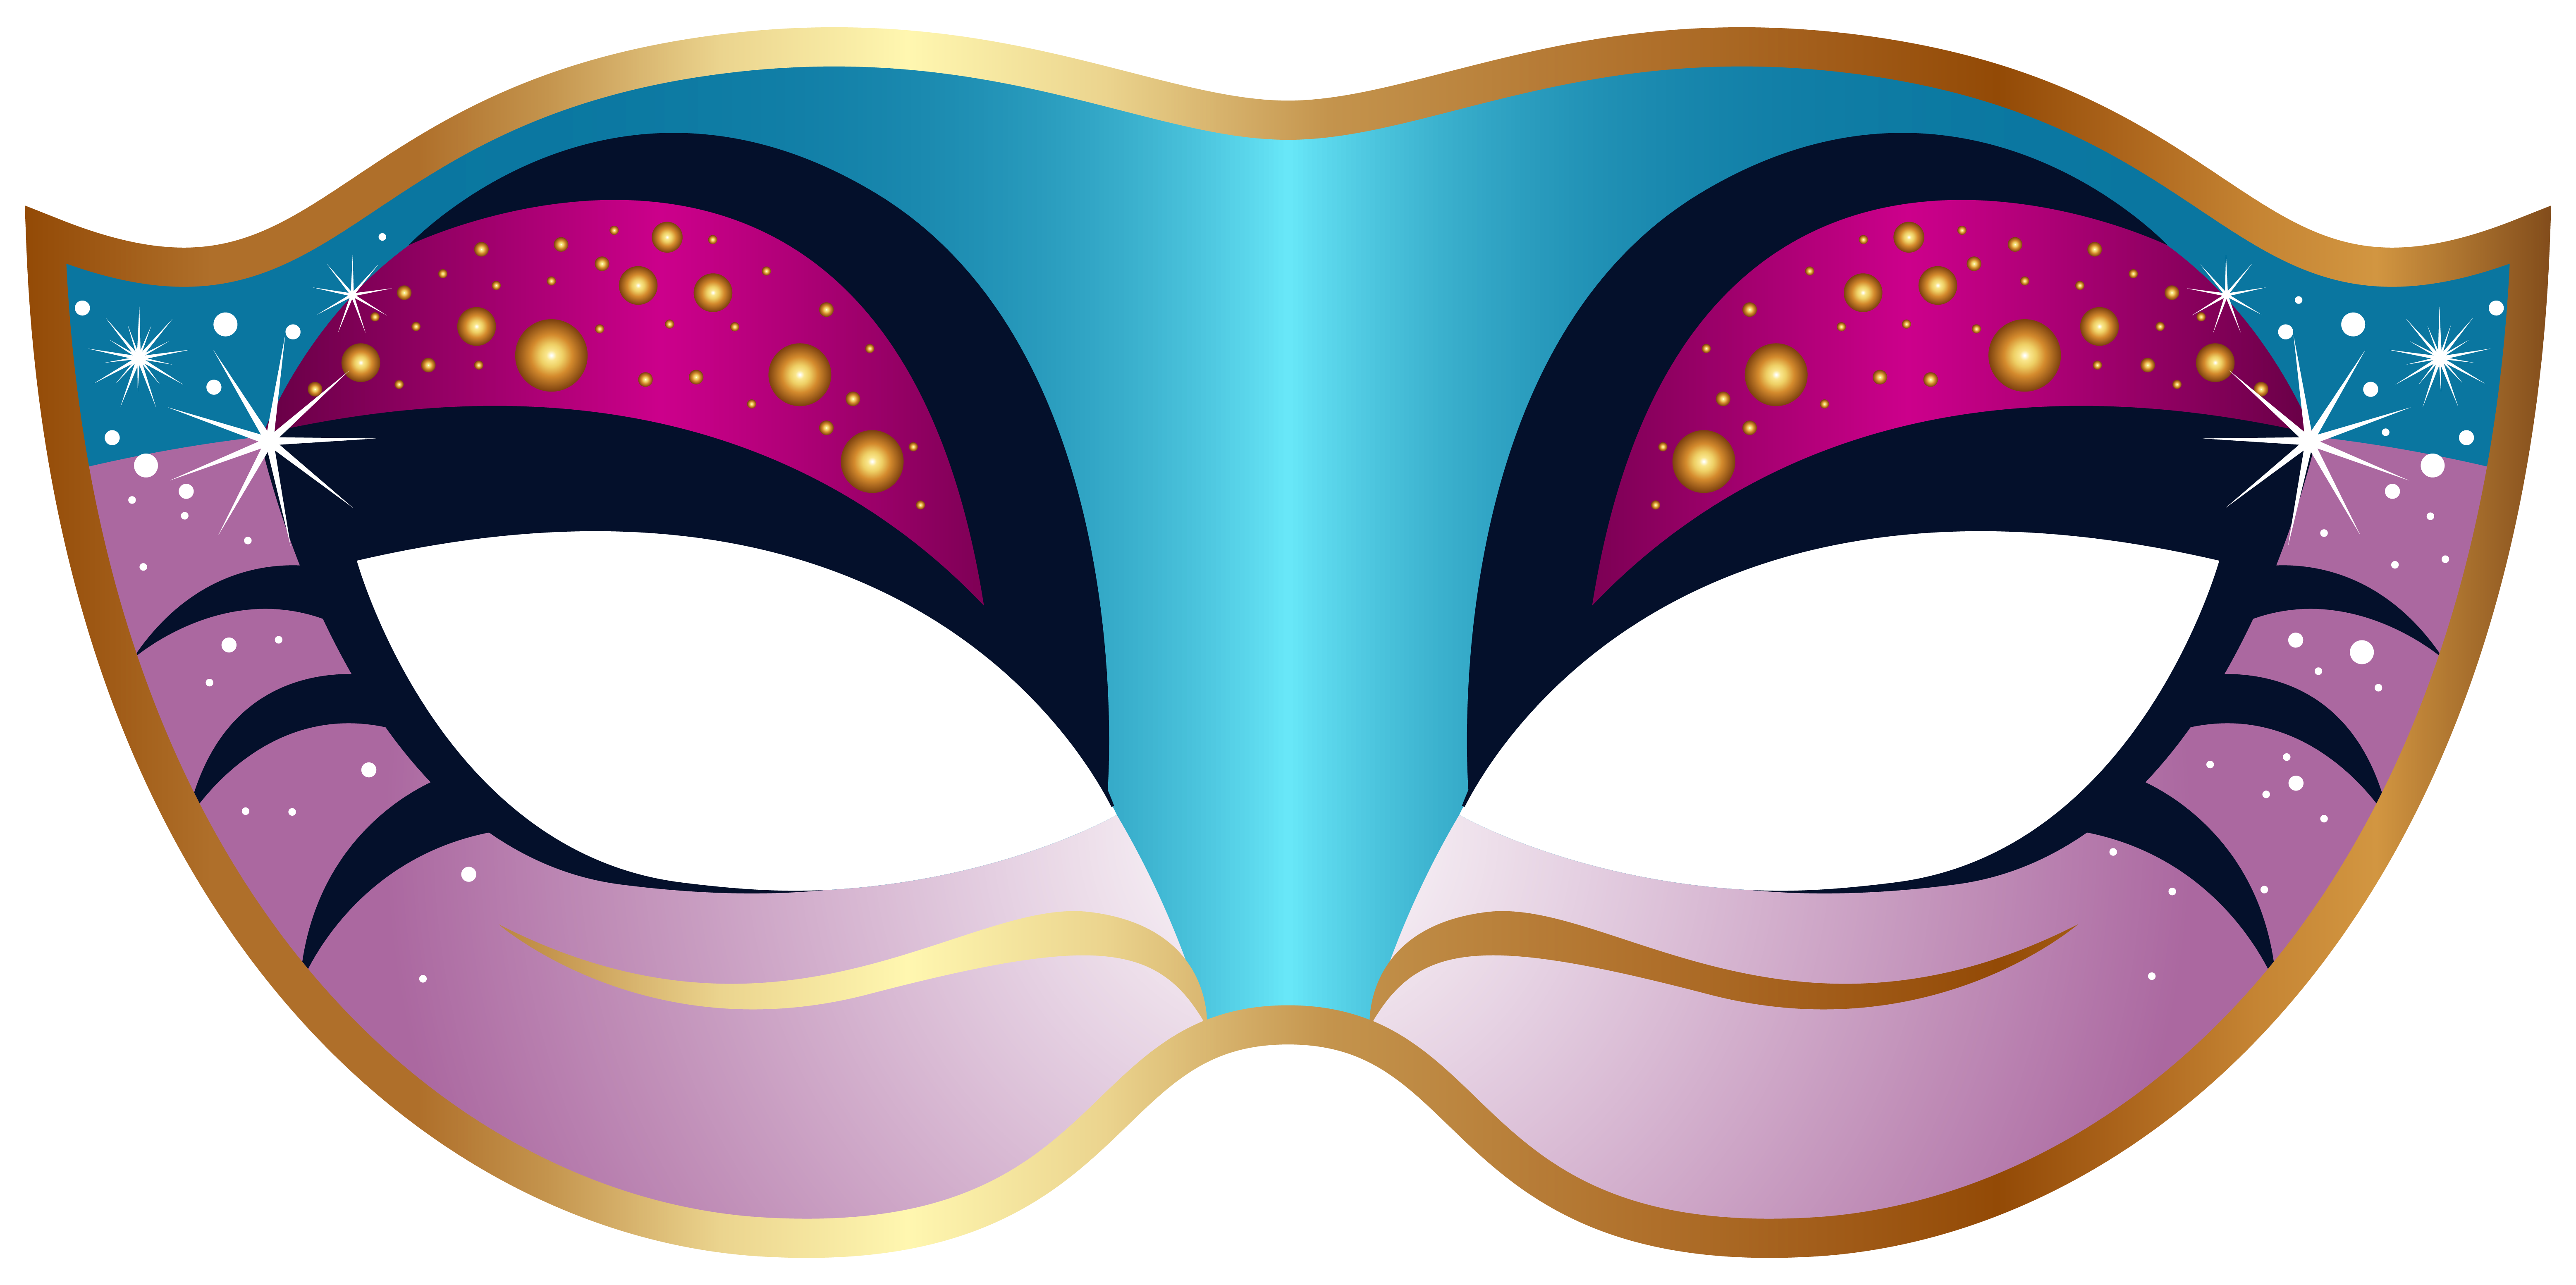 Fall carnival free images. Purim clipart mask